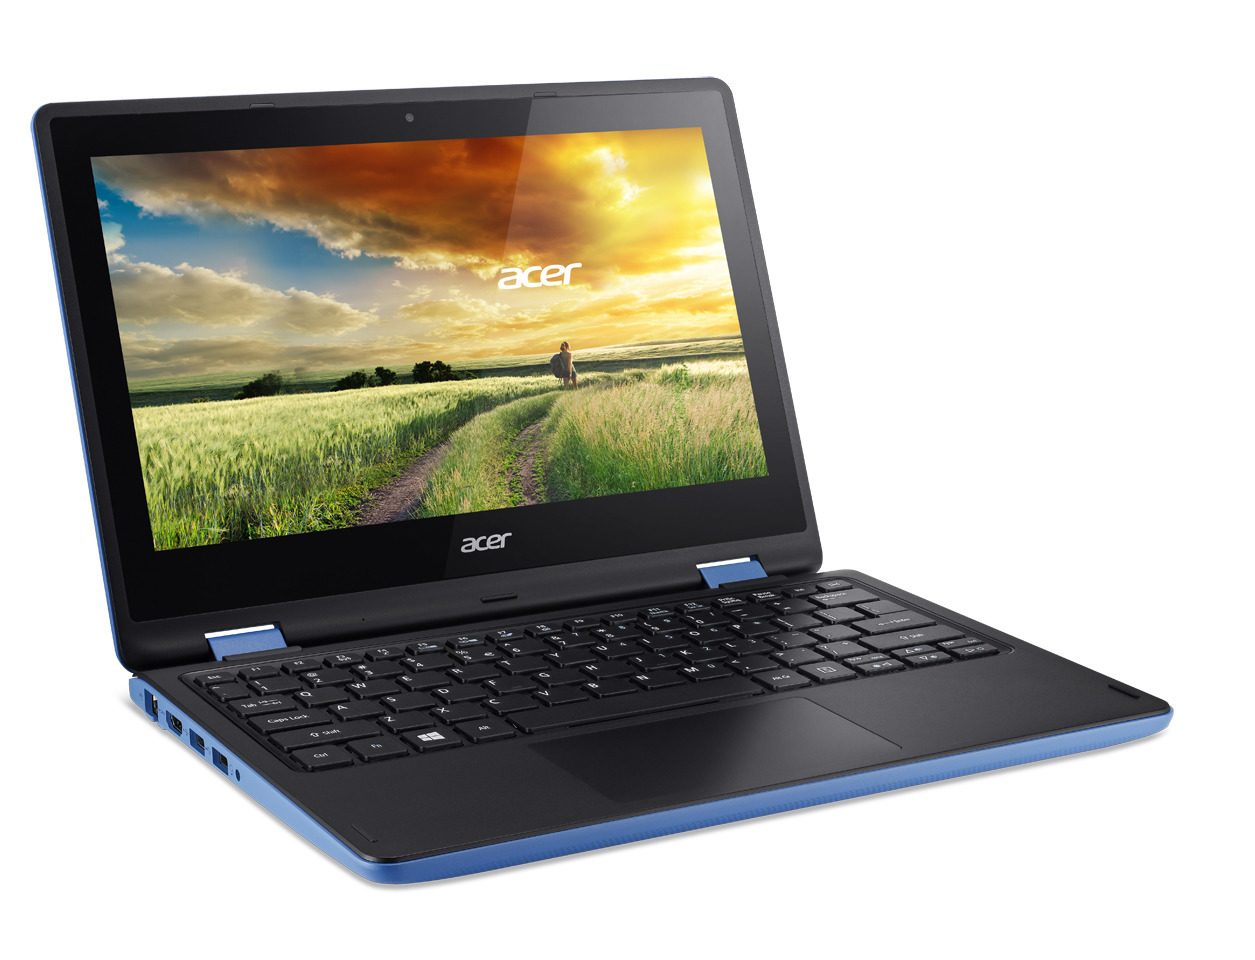 Acer Aspire R 11 - an affordable fanless convertible (first look)